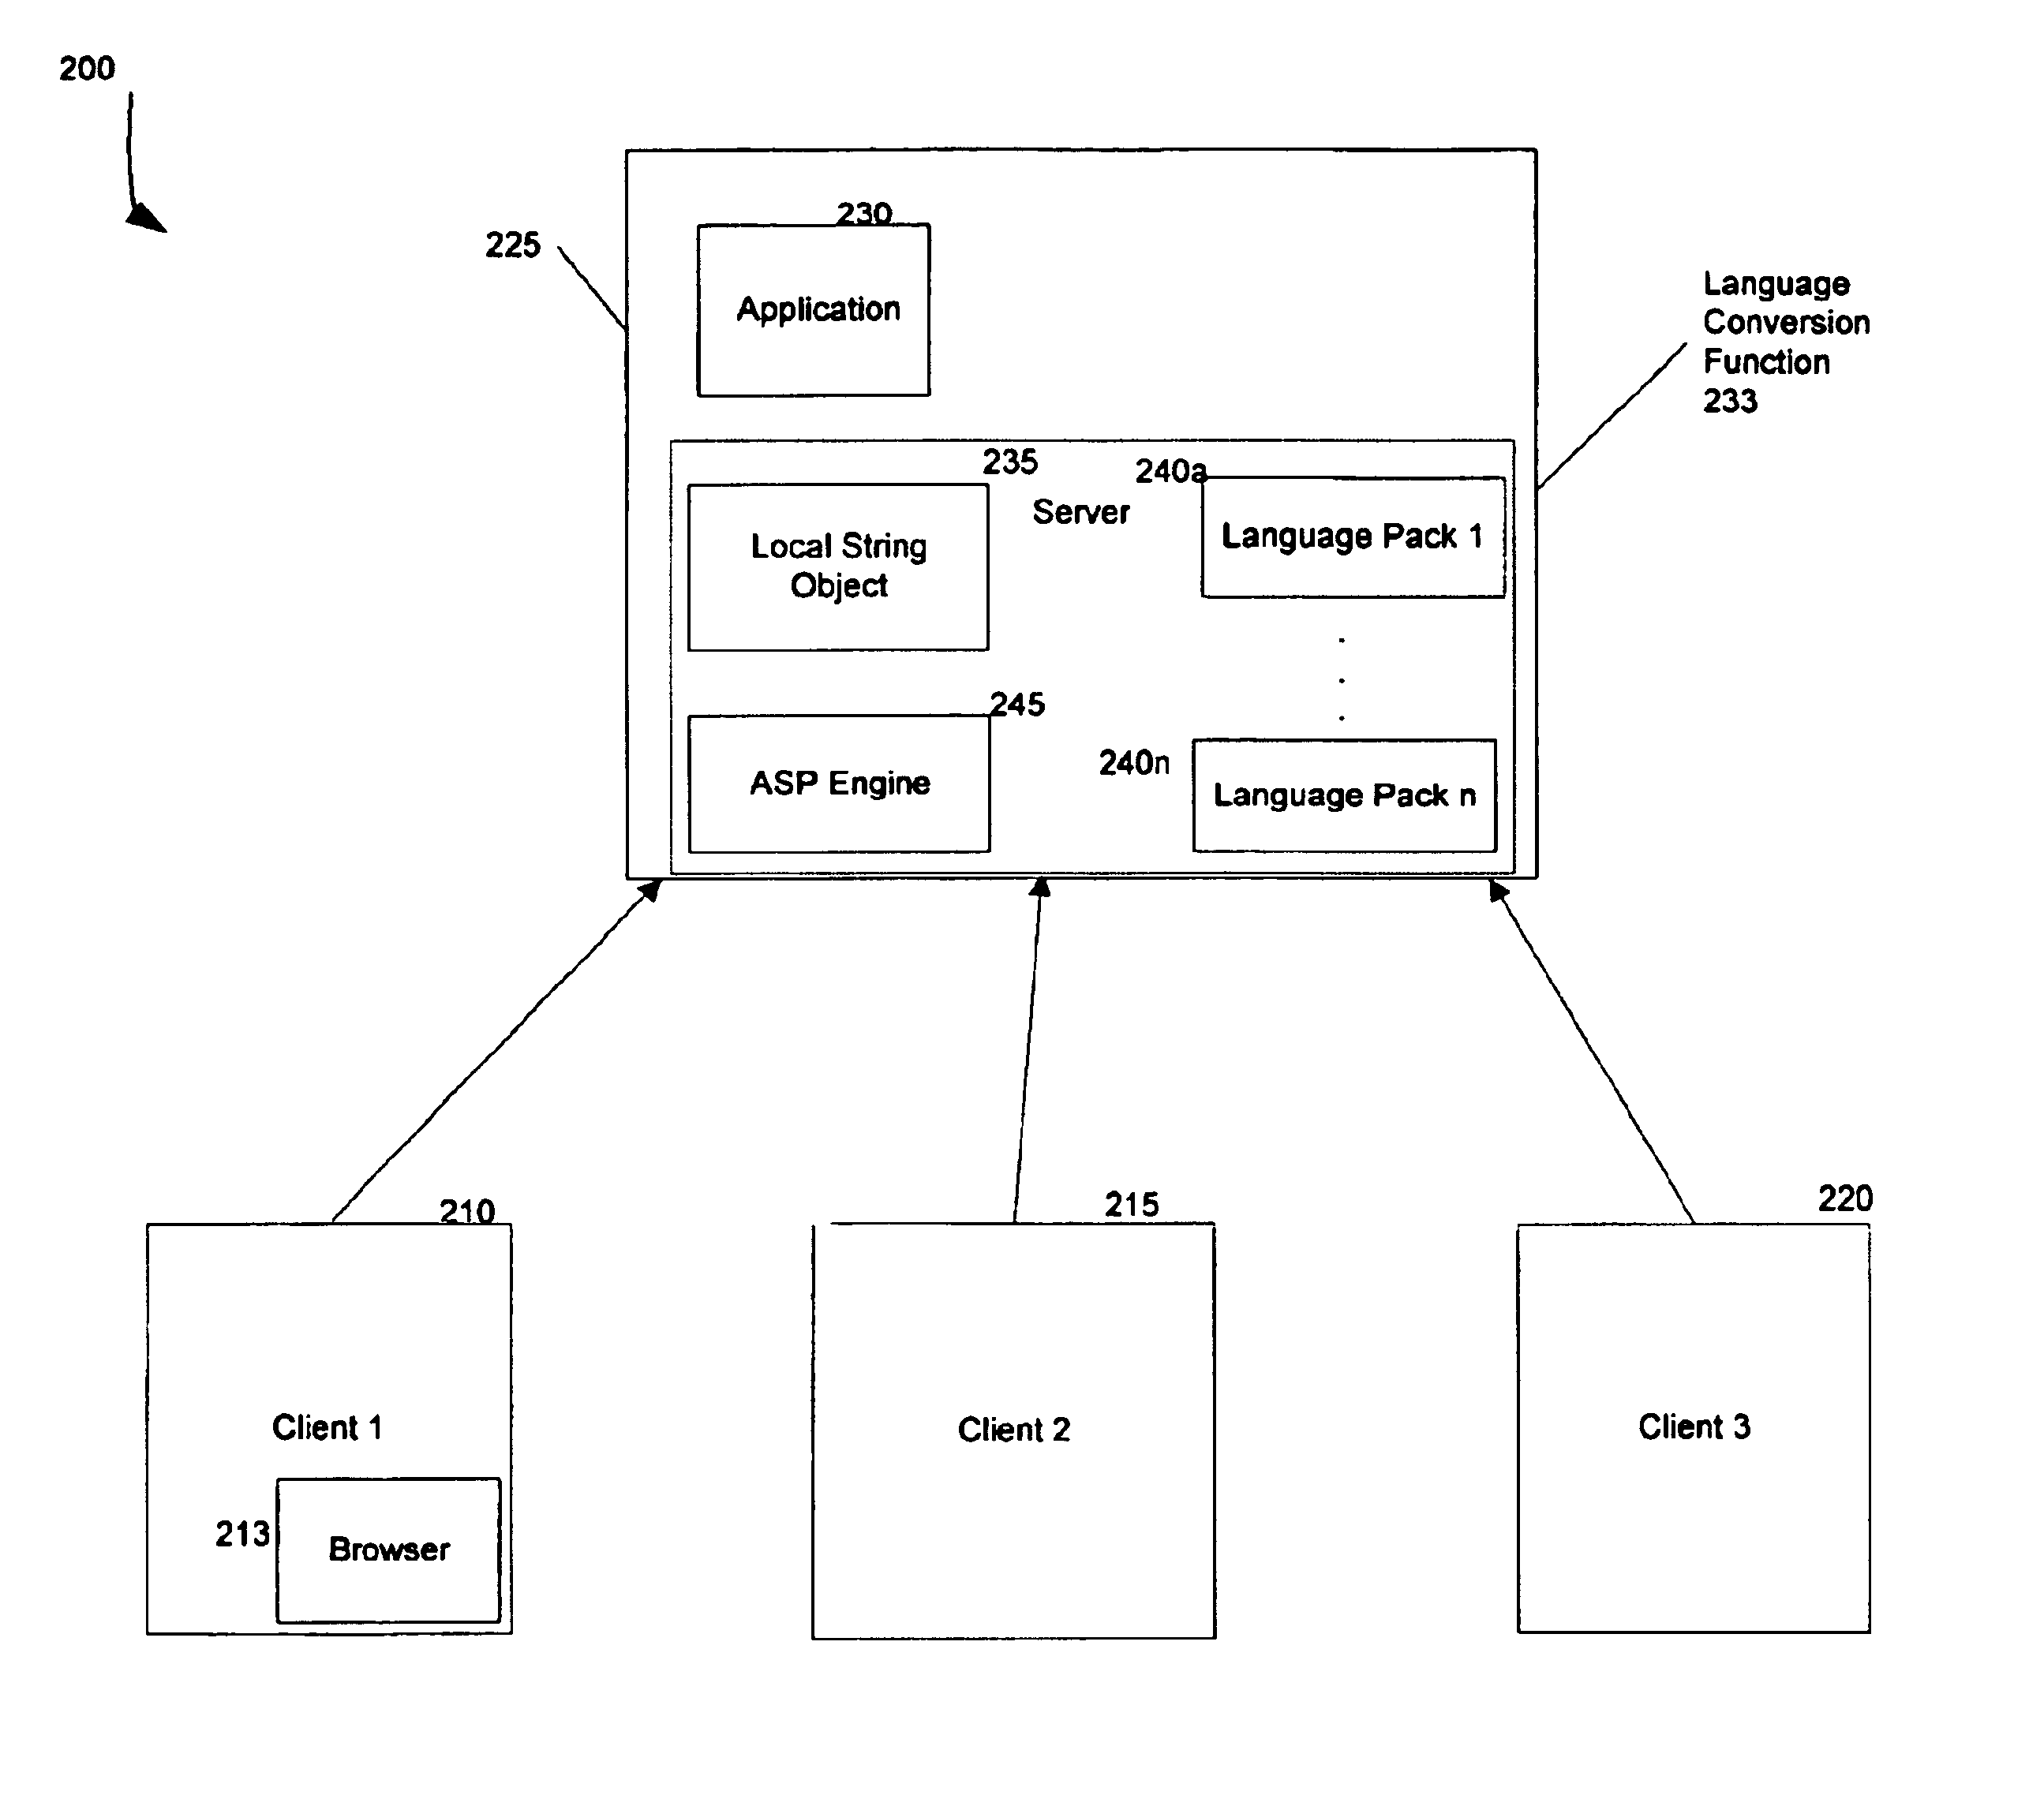 System and method for providing language localization for server-based applications